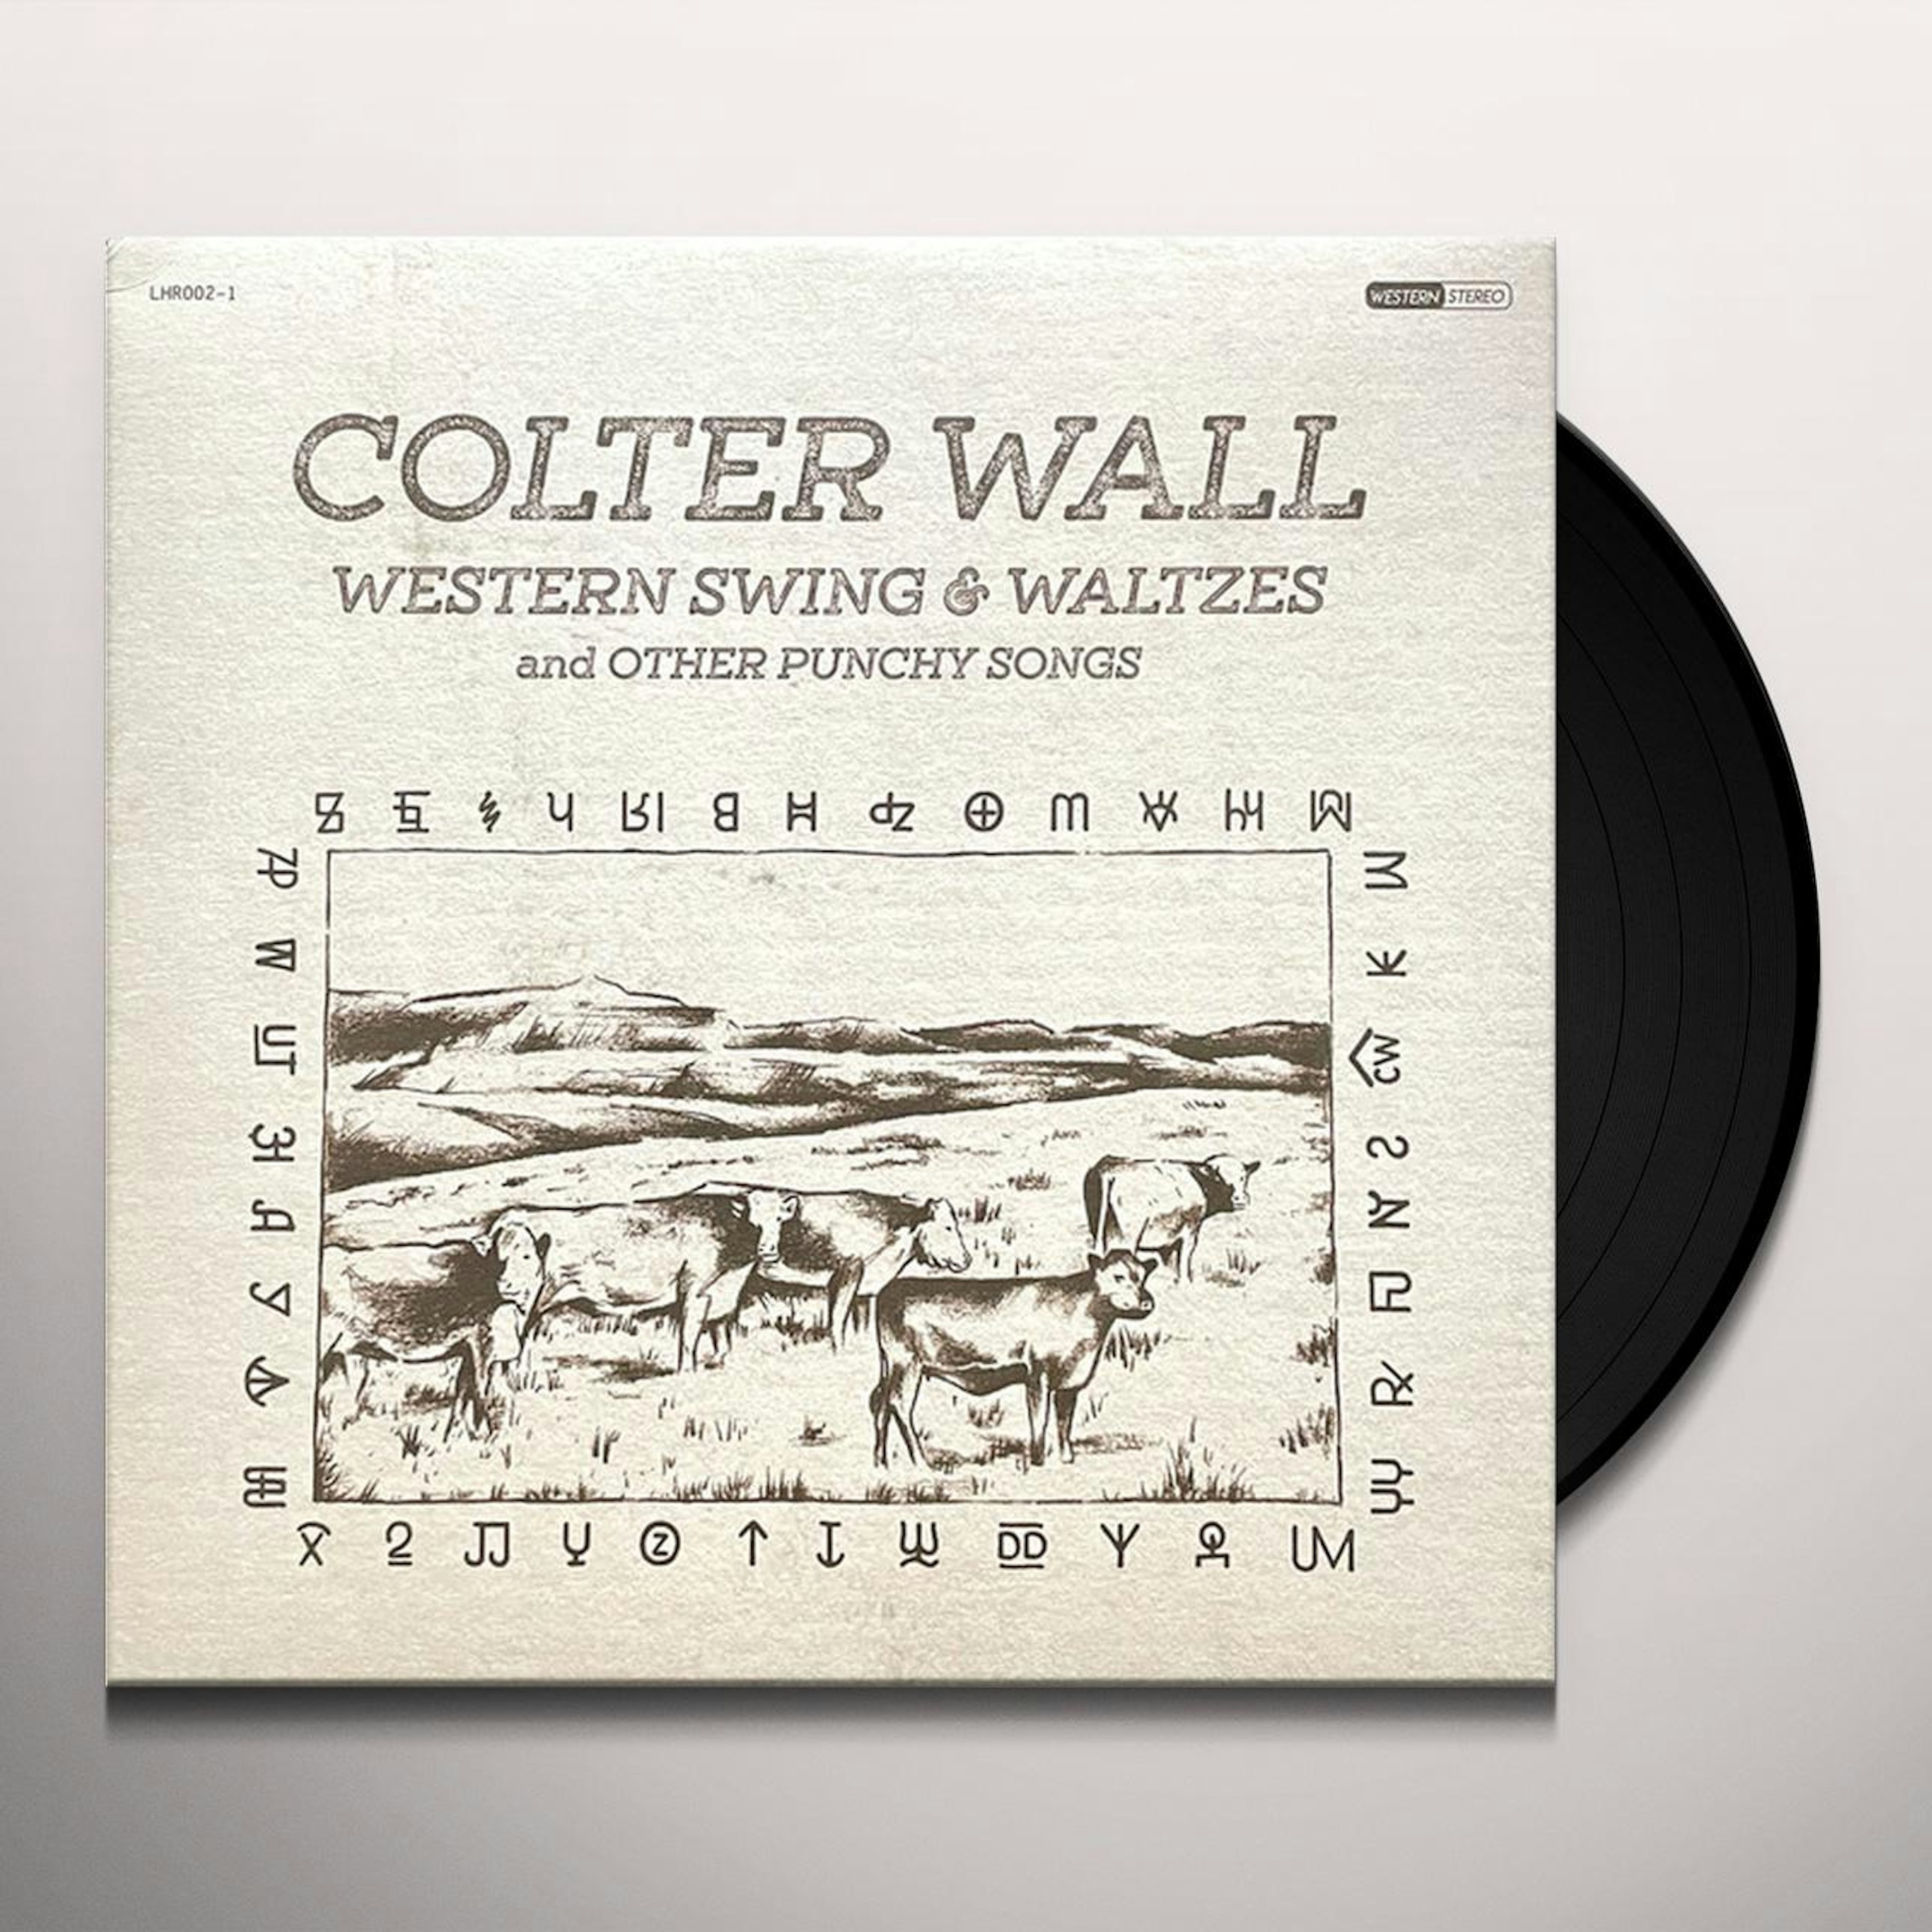 Krage vej indsigelse Colter Wall WESTERN SWING & WALTZES & OTHER PUNCHY SONGS Vinyl Record